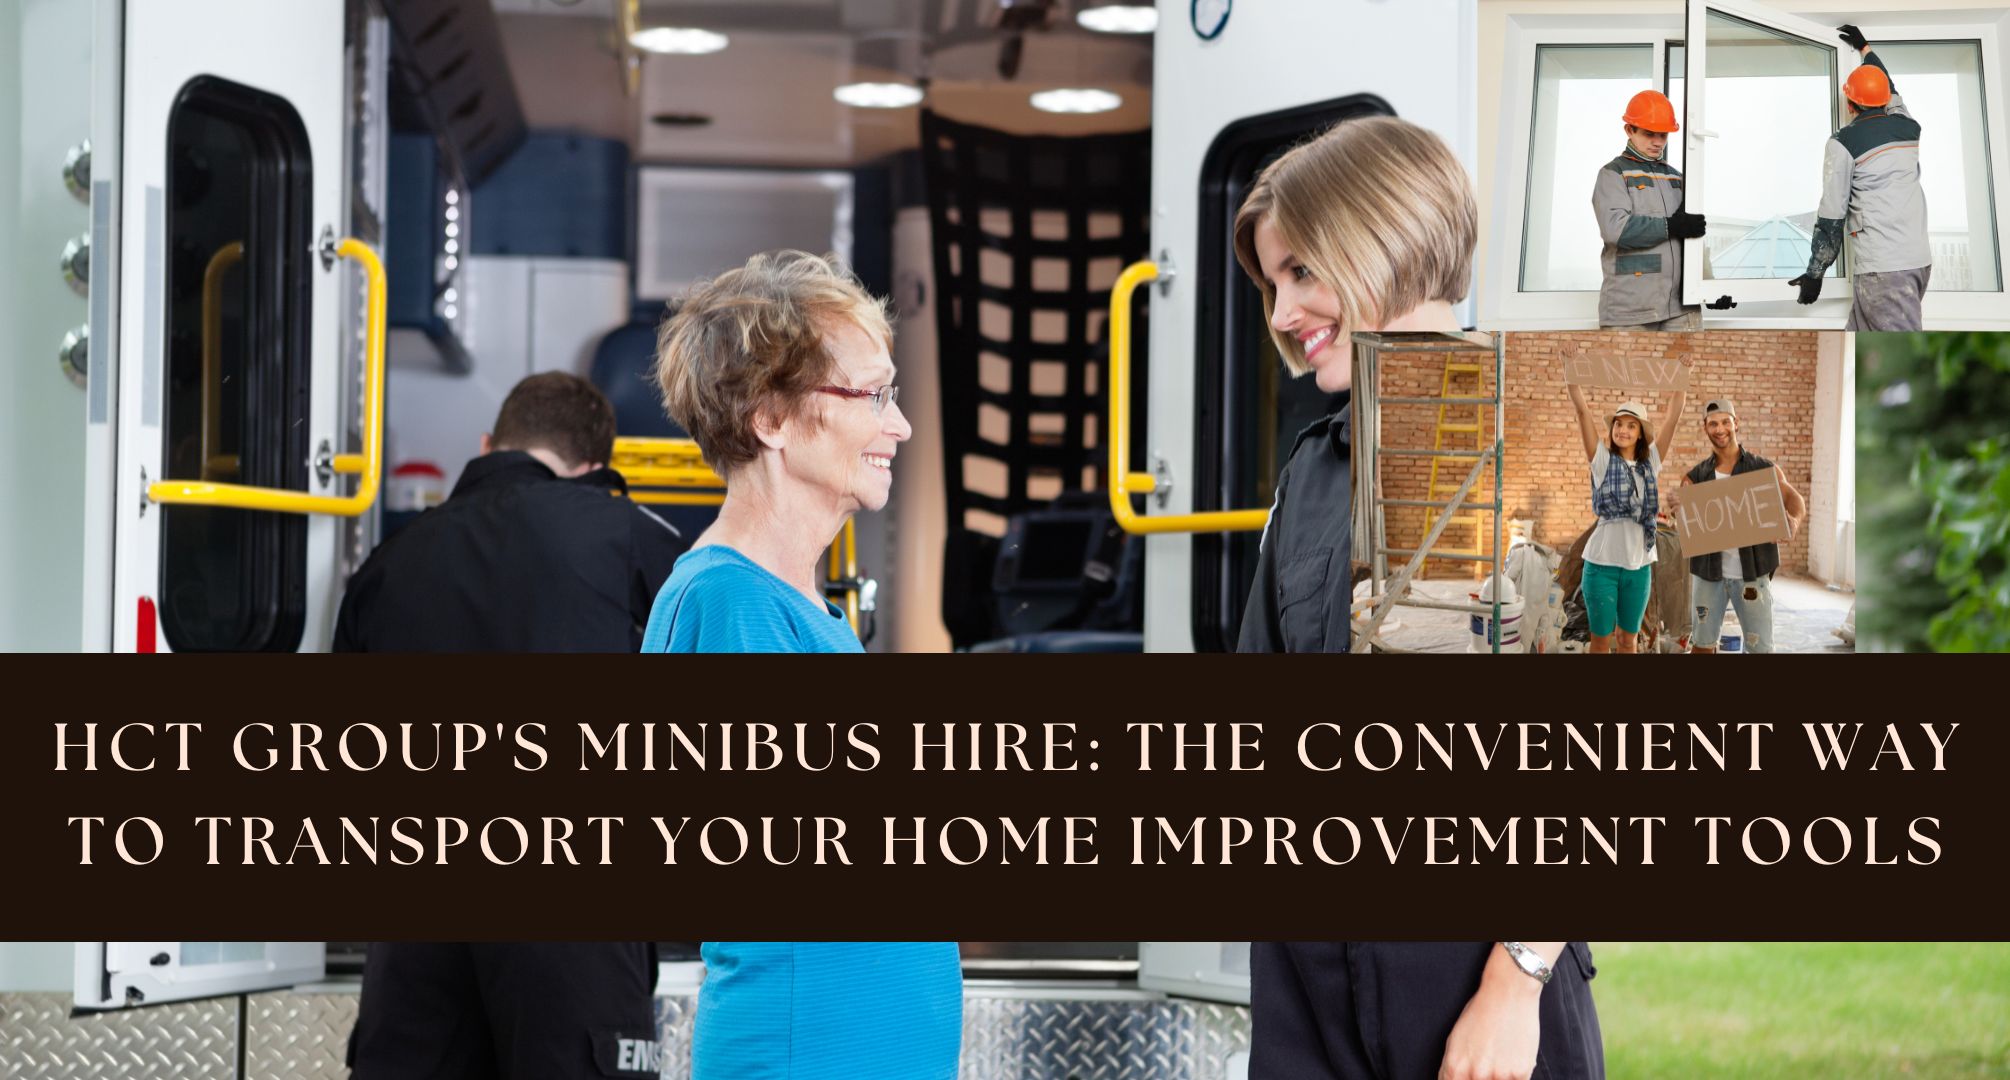 HCT Group's Minibus Hire The Convenient Way to Transport Your Home Improvement Tools